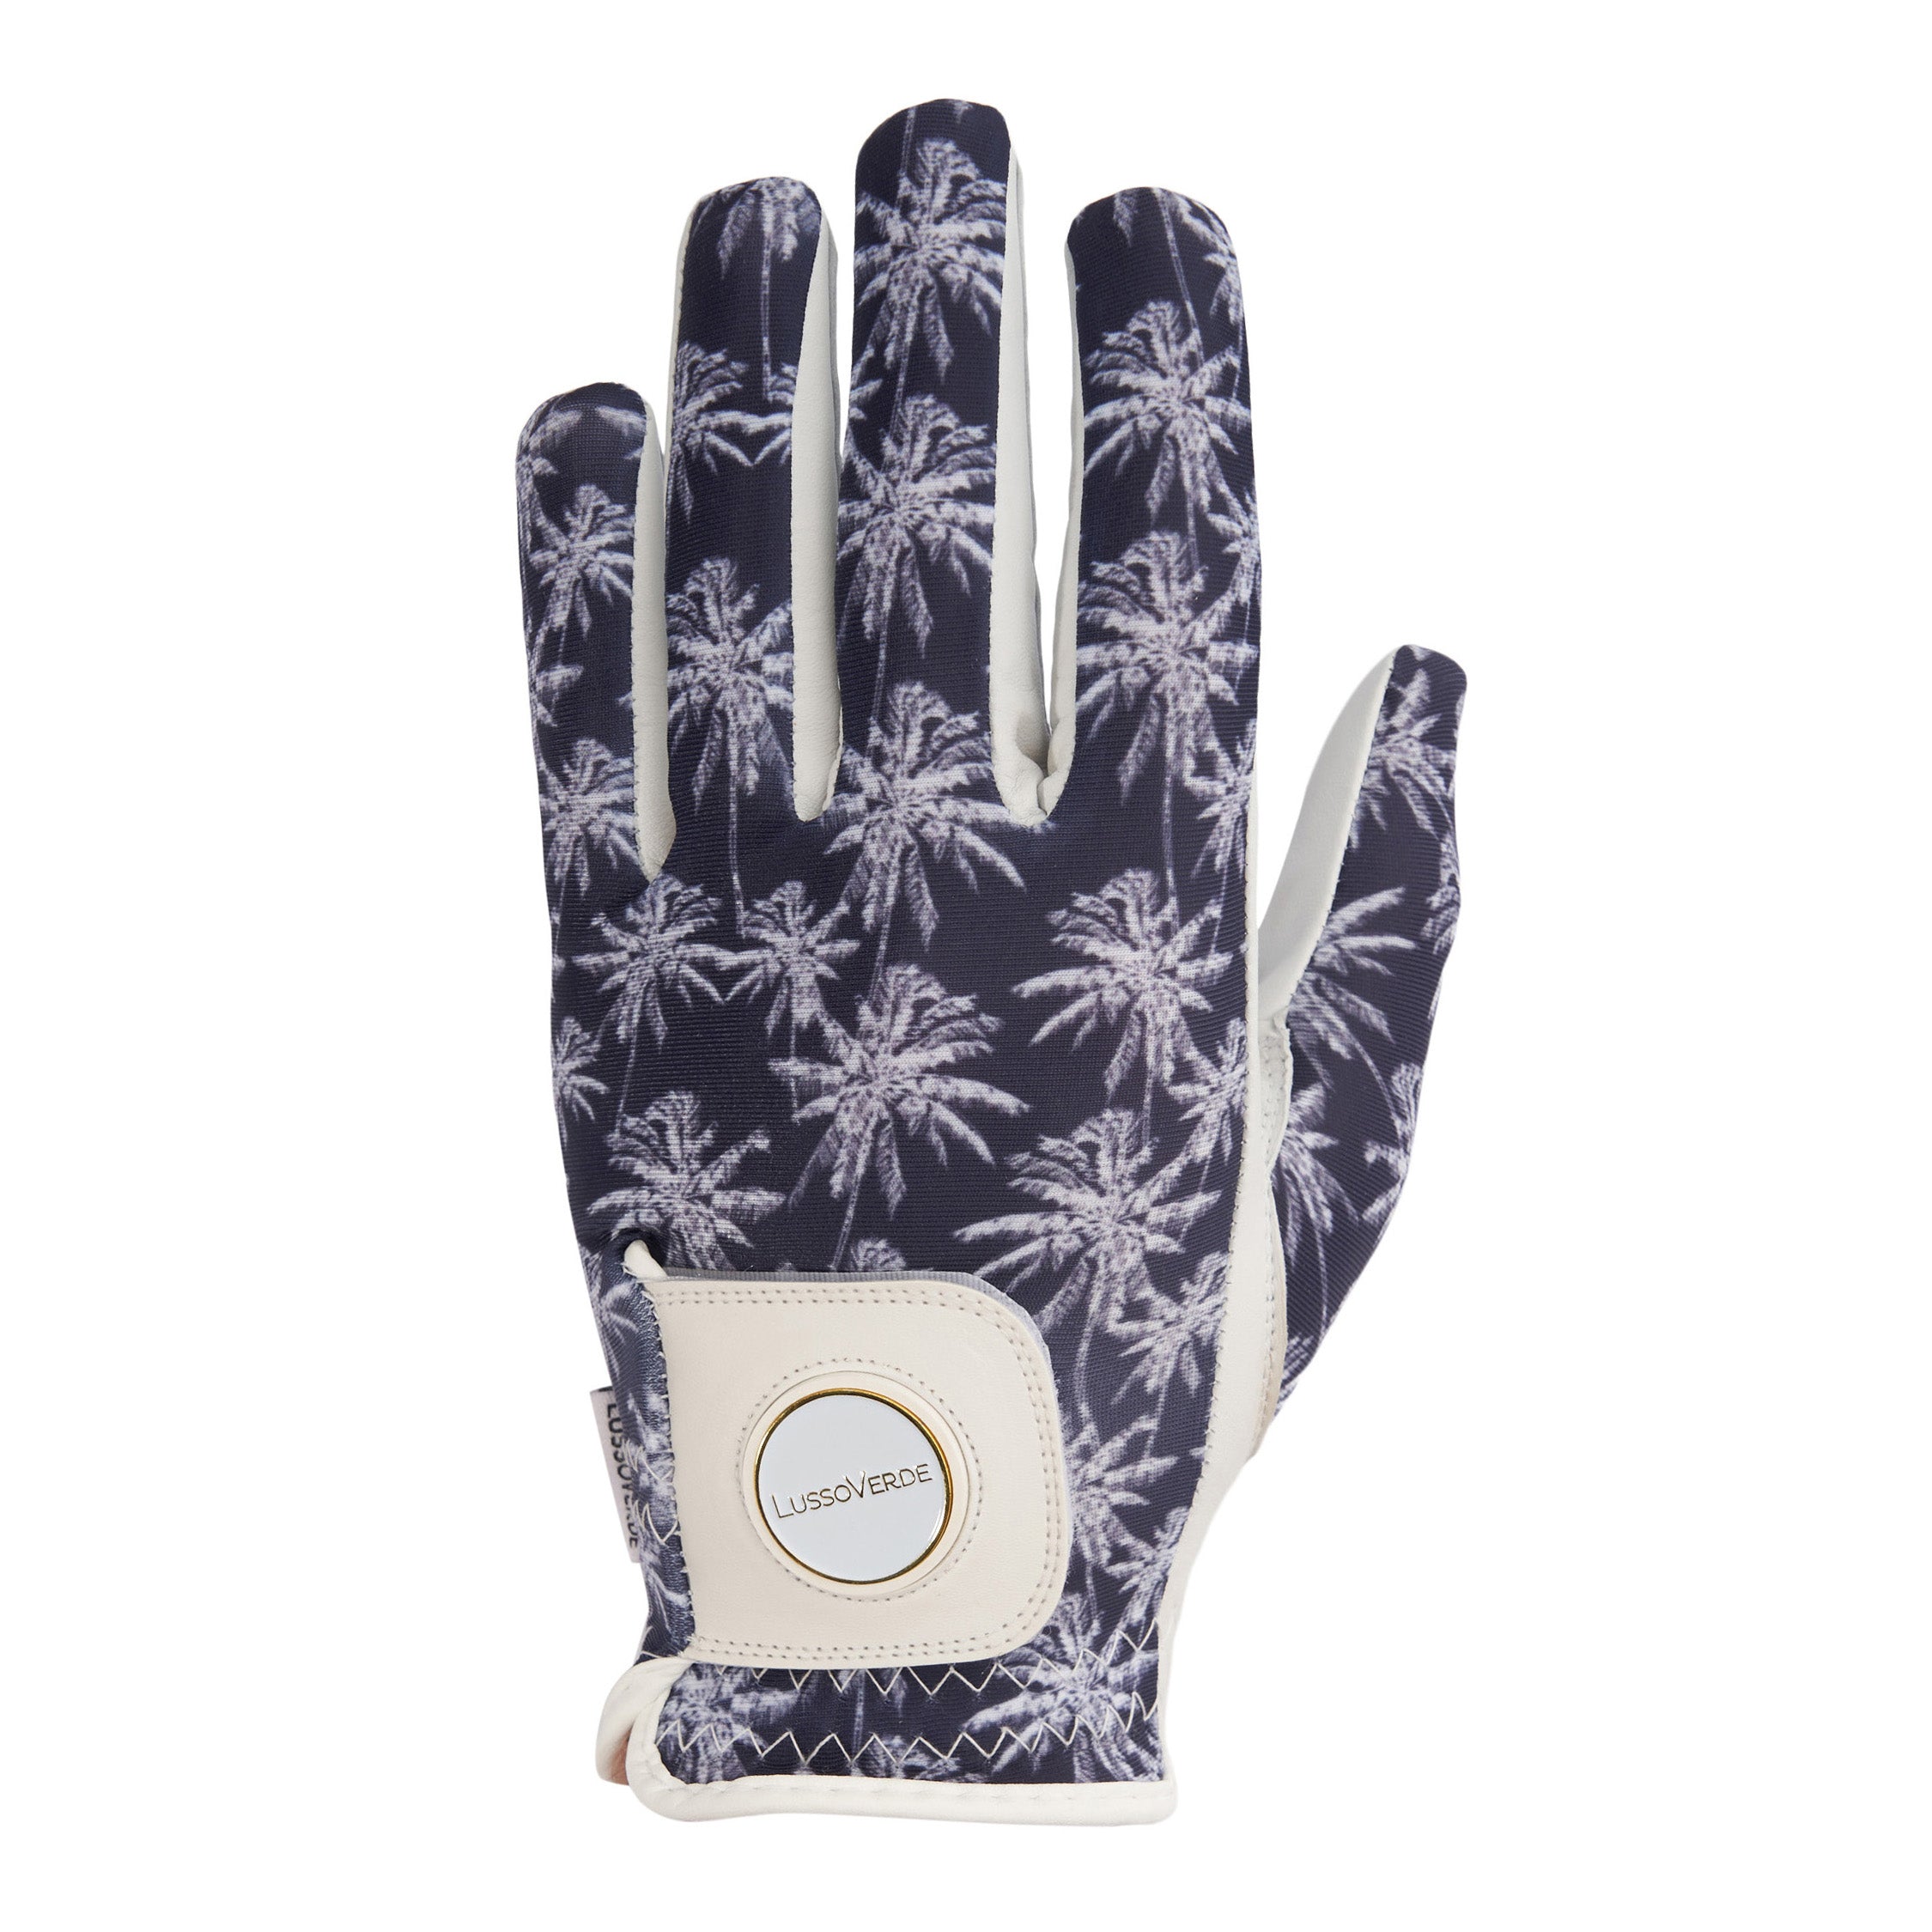 Sublimated Golf Glove w/ Lycra Back & Cabretta Leather Palm in Full Color, Made-to-Order